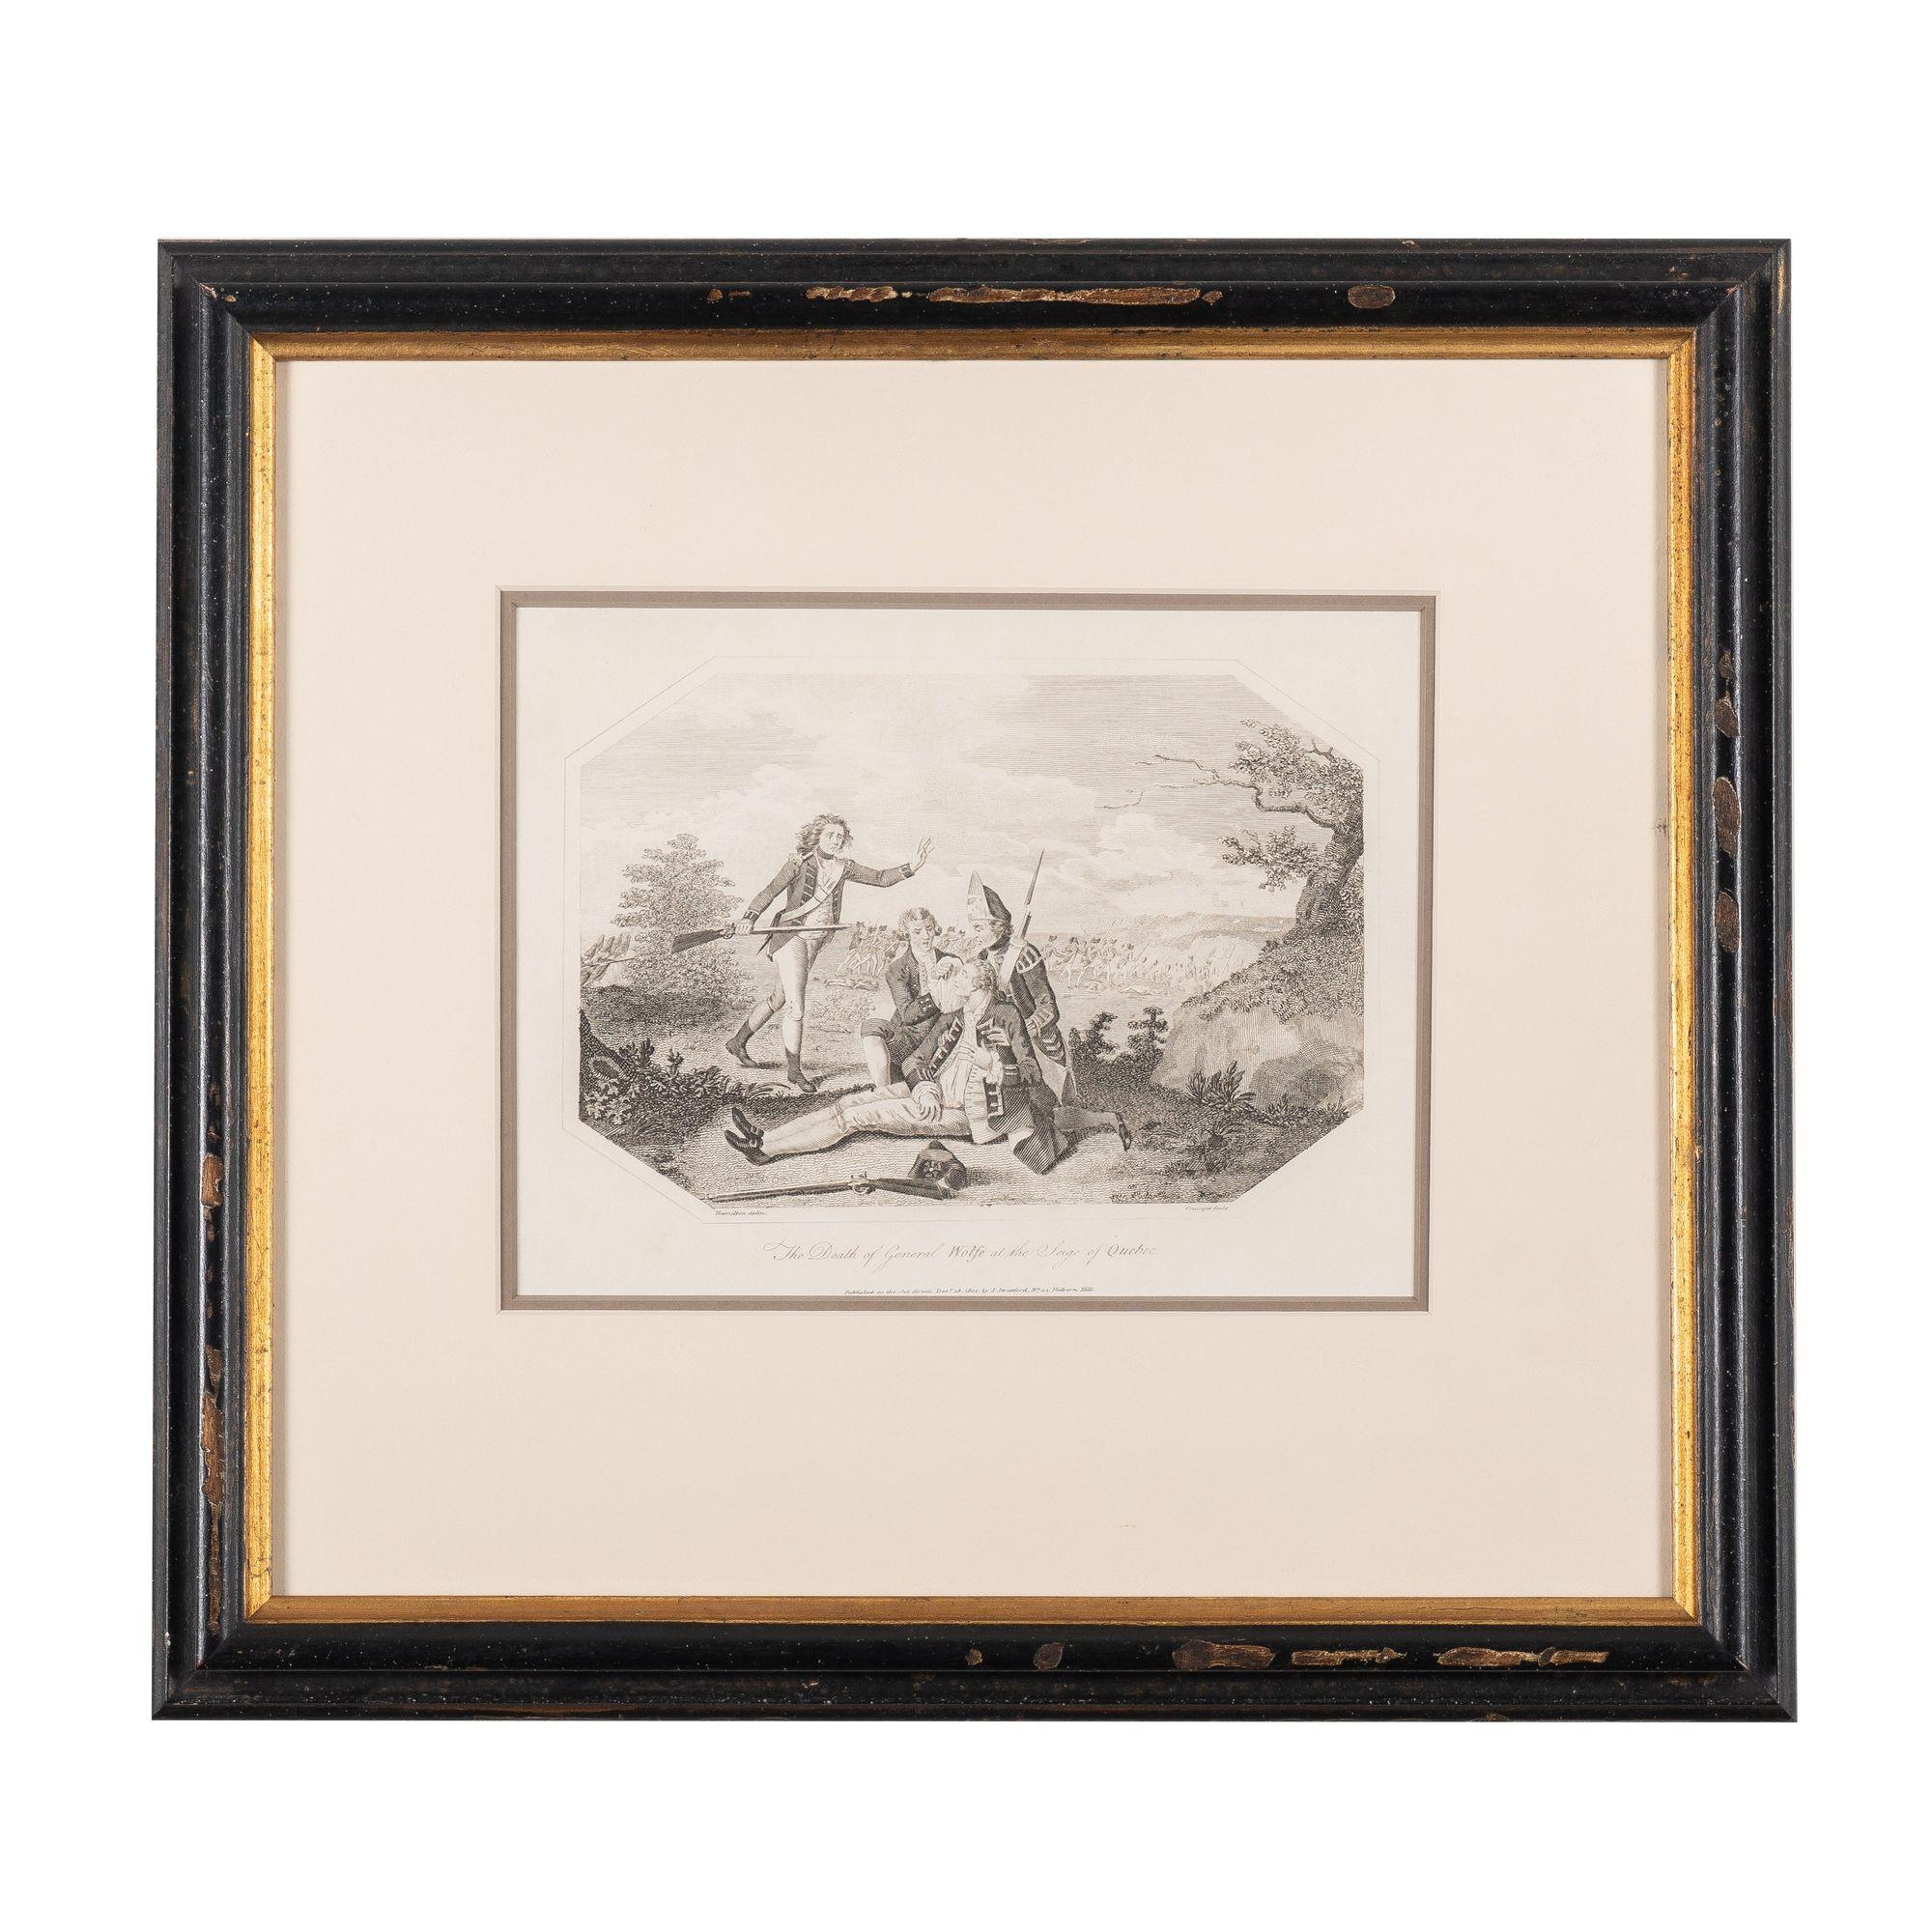 Pair of etchings and engravings on laid paper by William Grainger (1765–1809), after William Hamilton.

Death of General Wolfe at the Siege of Quebec: The general is sitting up, supported by an officer kneeling beside him, as another runs towards